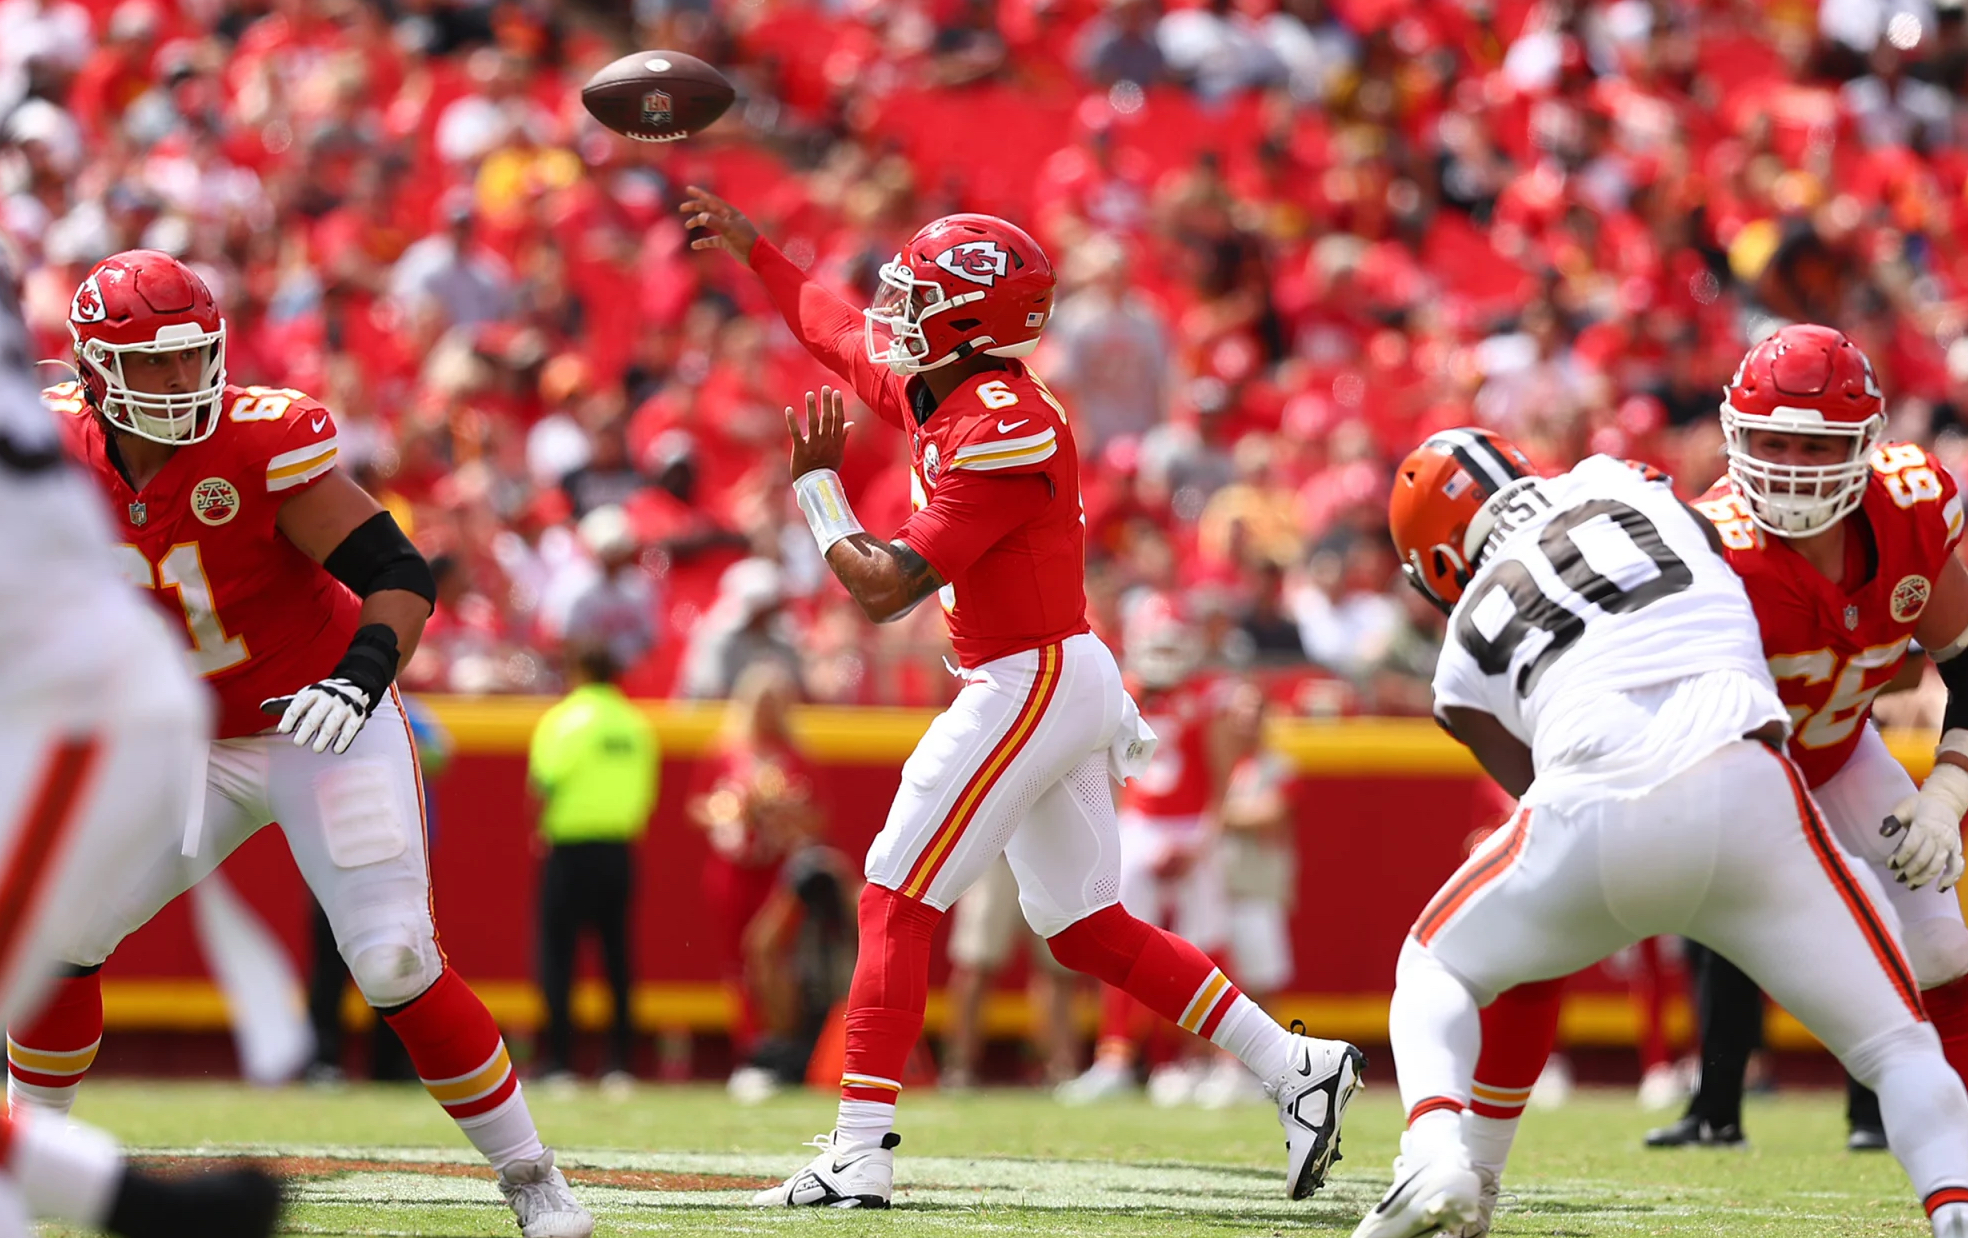 Chiefs lose first preseason game to the New Orleans Saints, 26-24